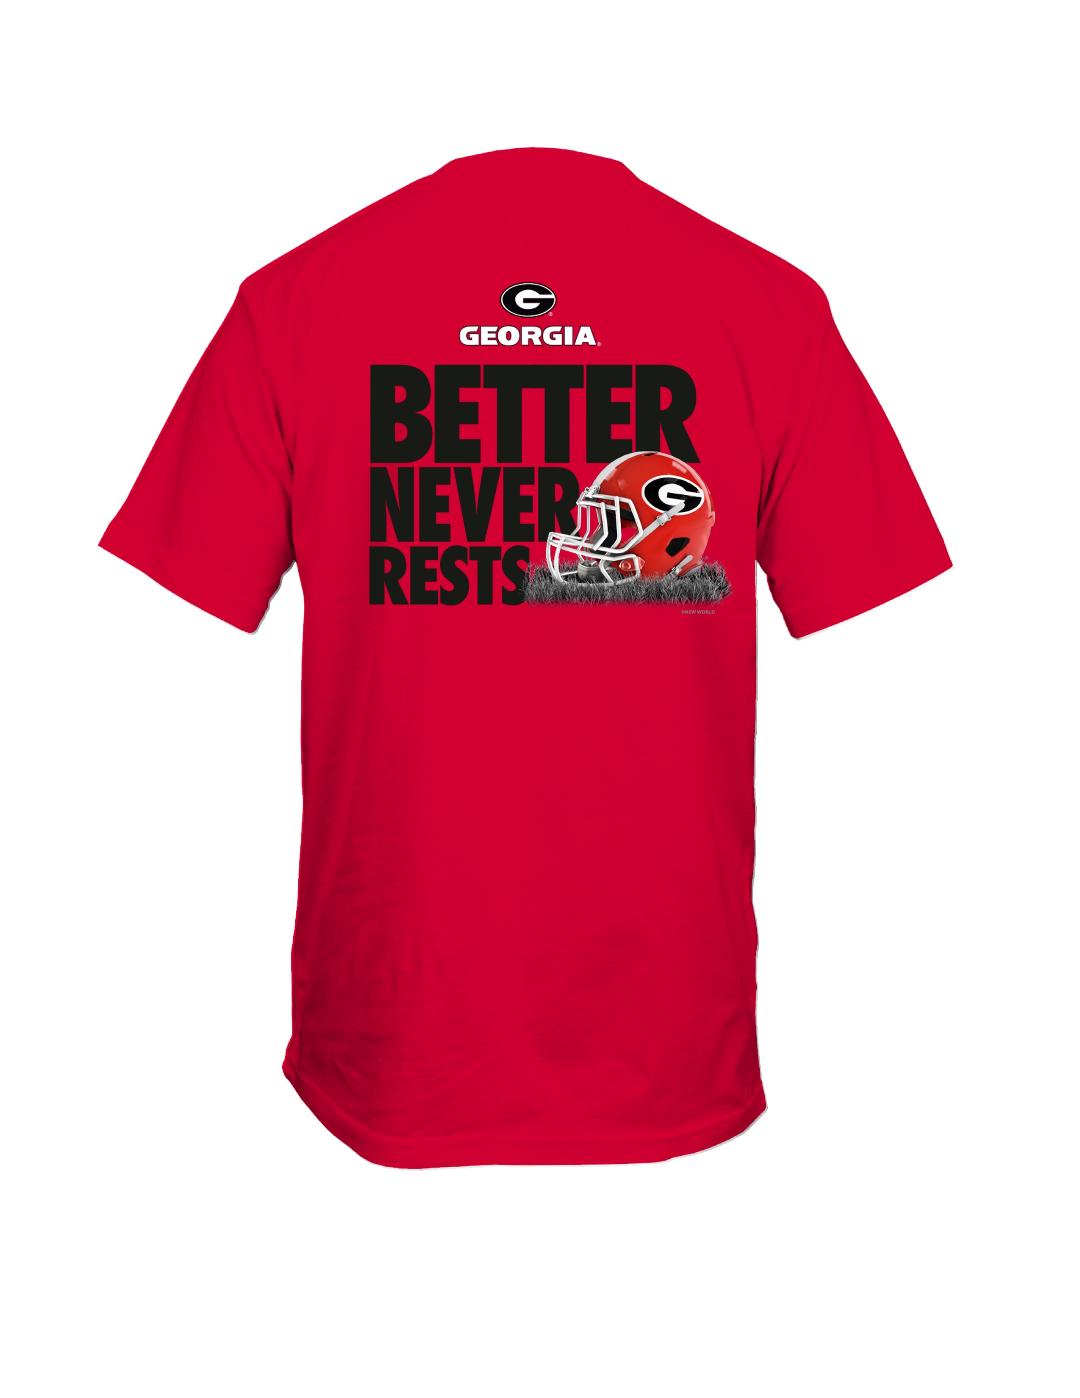 UGA BETTER NEVER RESTS RED SHIRTS